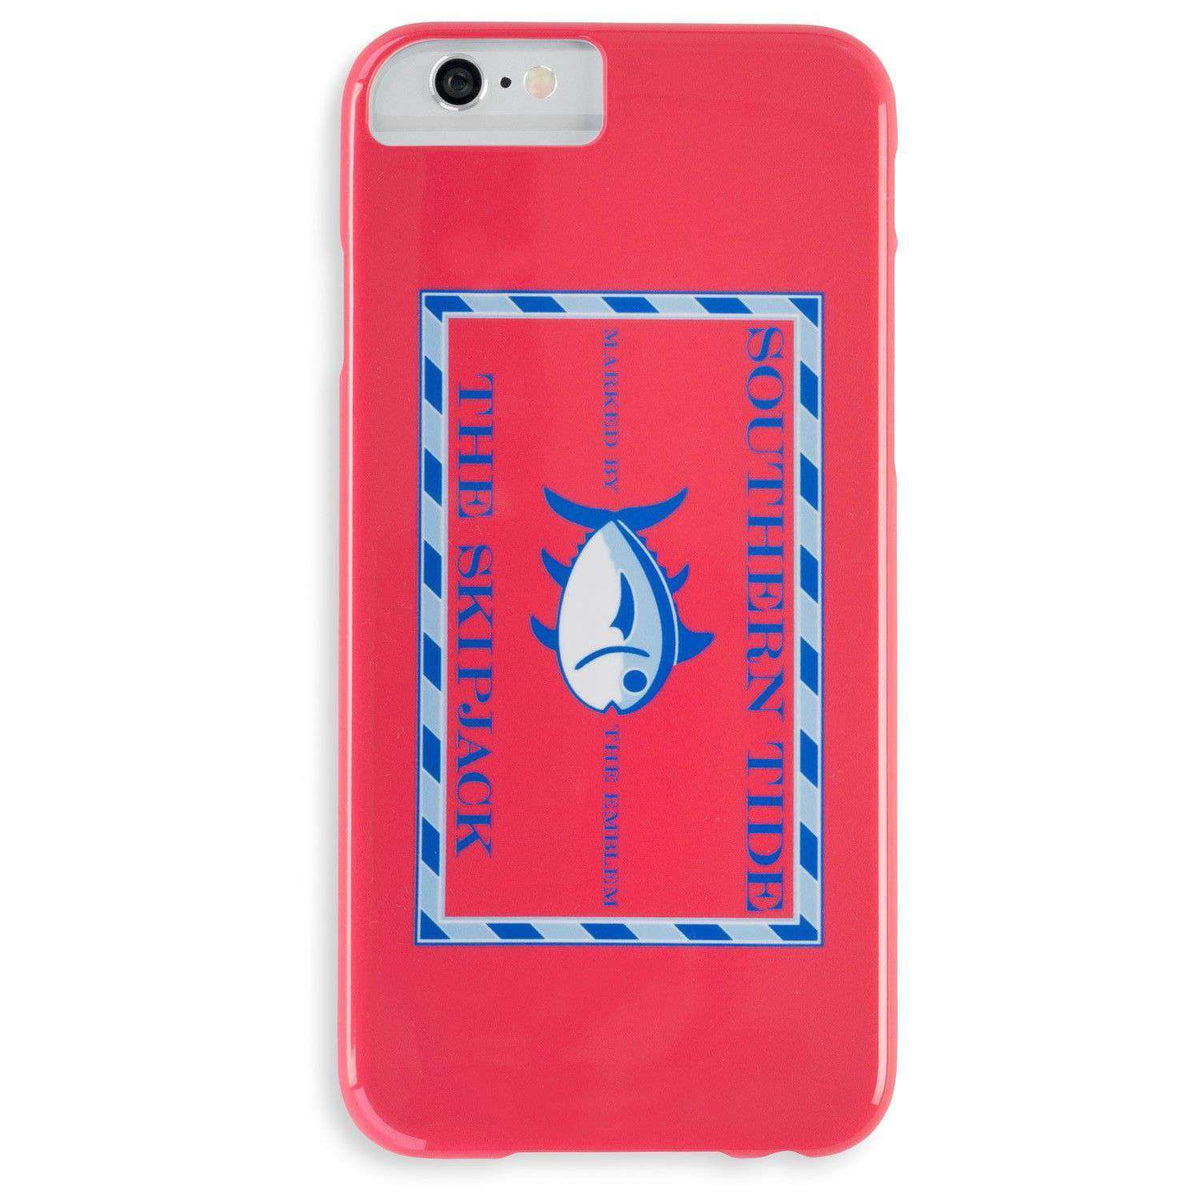 Original Skipjack iPhone 6/6s Case in Coral by Southern Tide - Country Club Prep